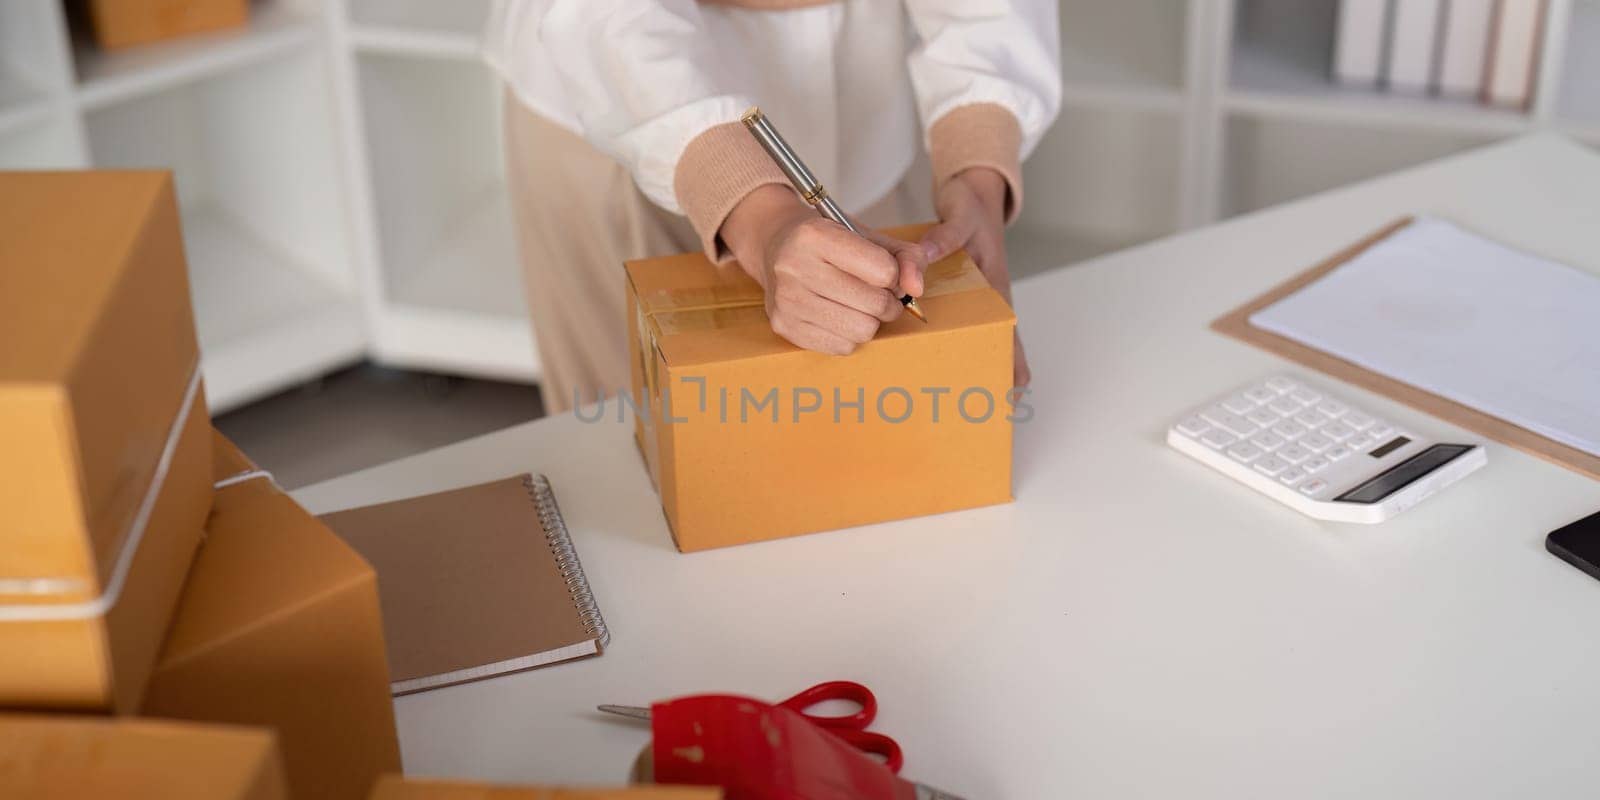 Woman is writing a list of customer on paper before shipping to them, she runs an ecommerce business on websites and social media. Concept of selling products online.